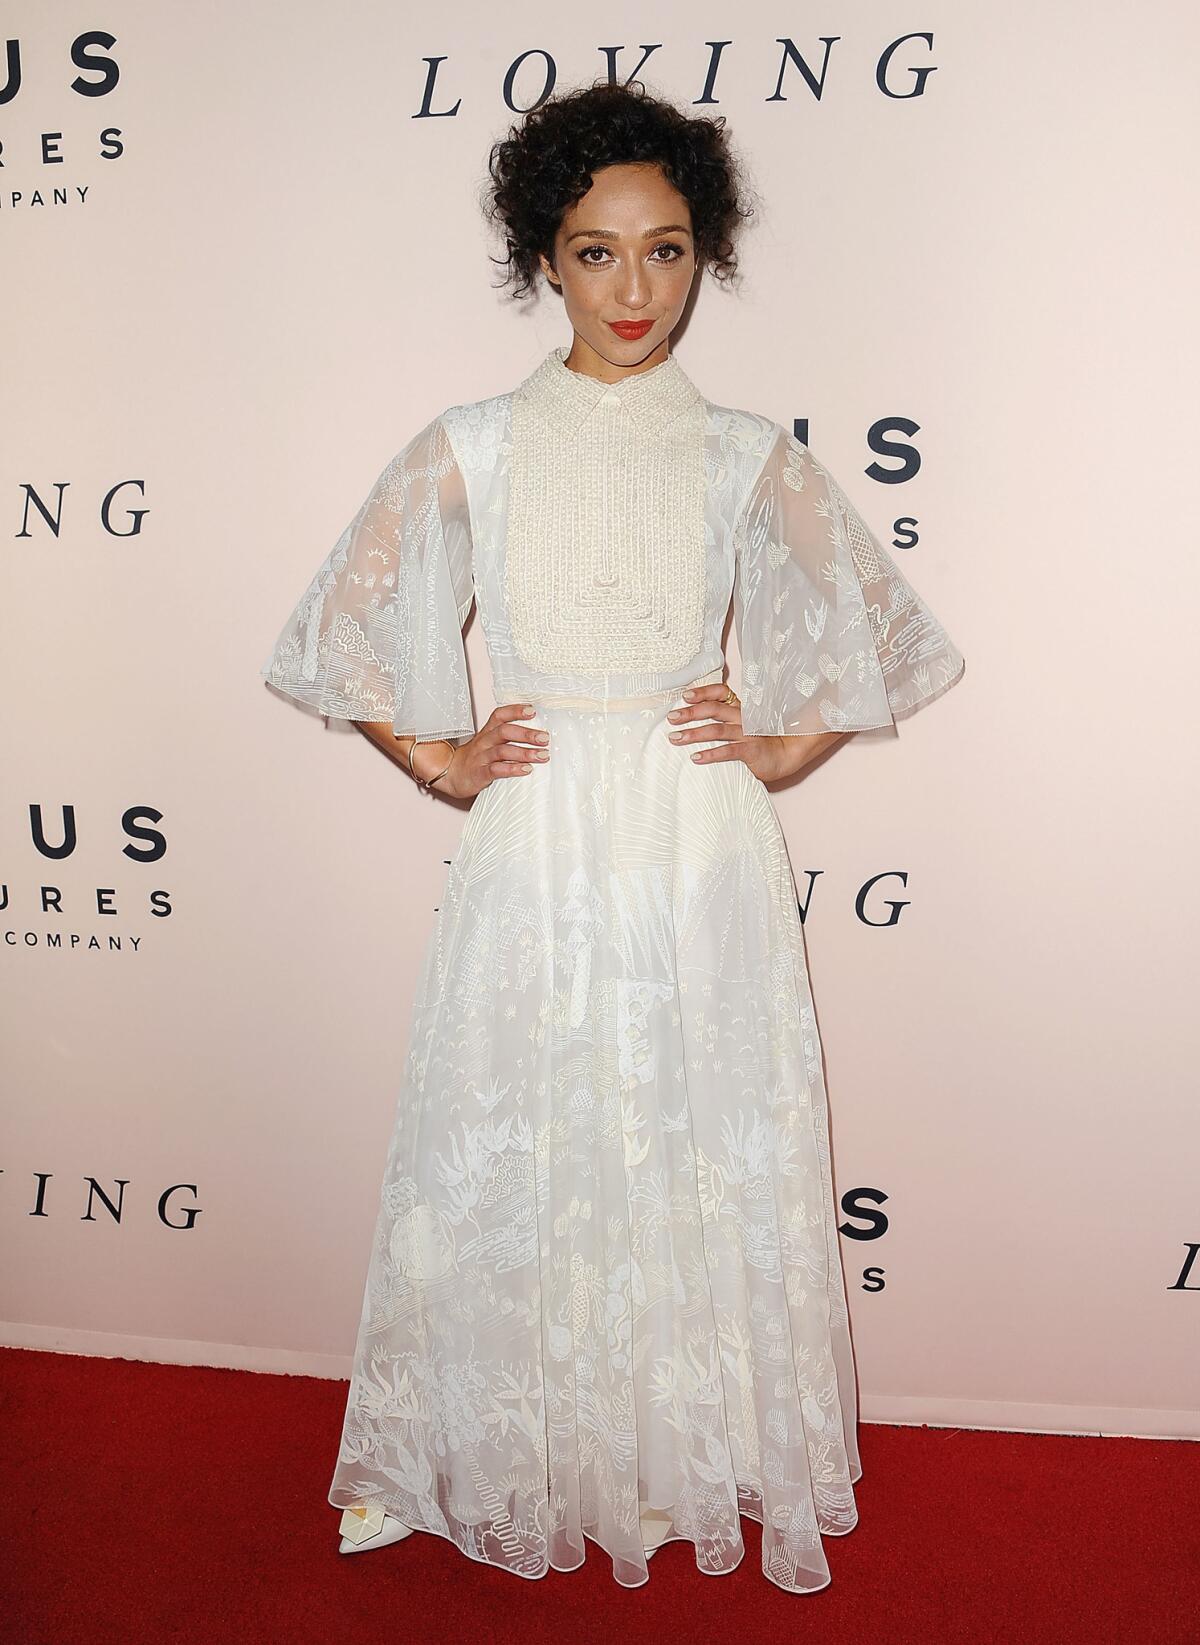 Negga personified retro romance at the Los Angeles “Loving” premiere, wearing a flowing white Valentino with cape sleeves, bib-front and all-over embellishment. (Jason LaVeris / FilmMagic)